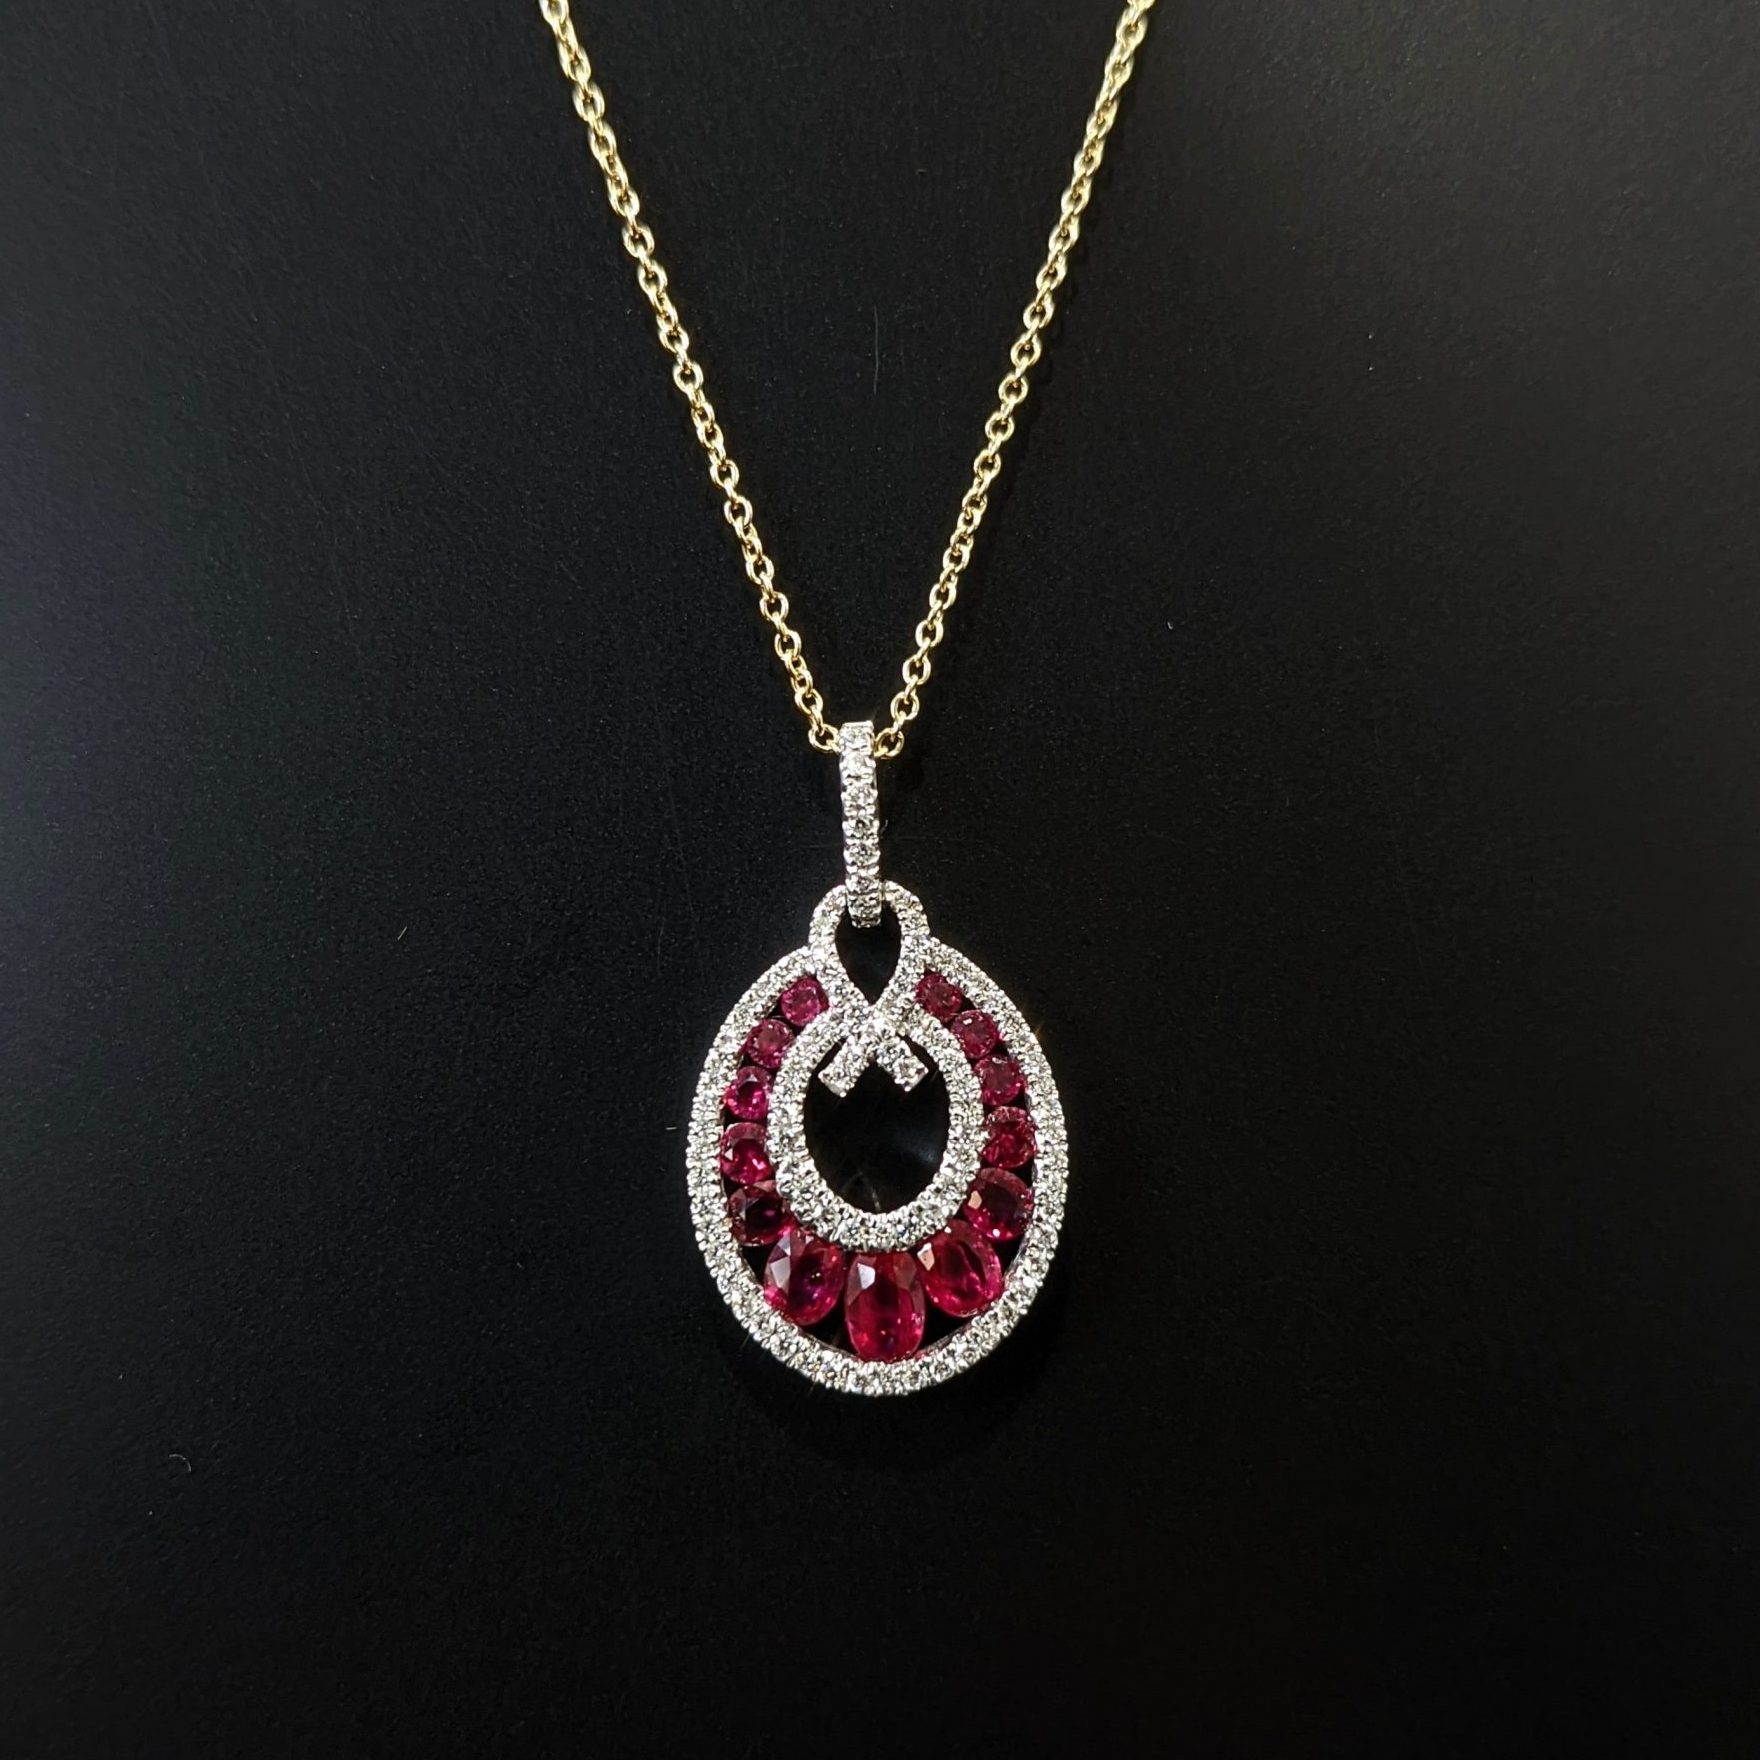 ladies necklace with ruby and diamond pendant and gold chain